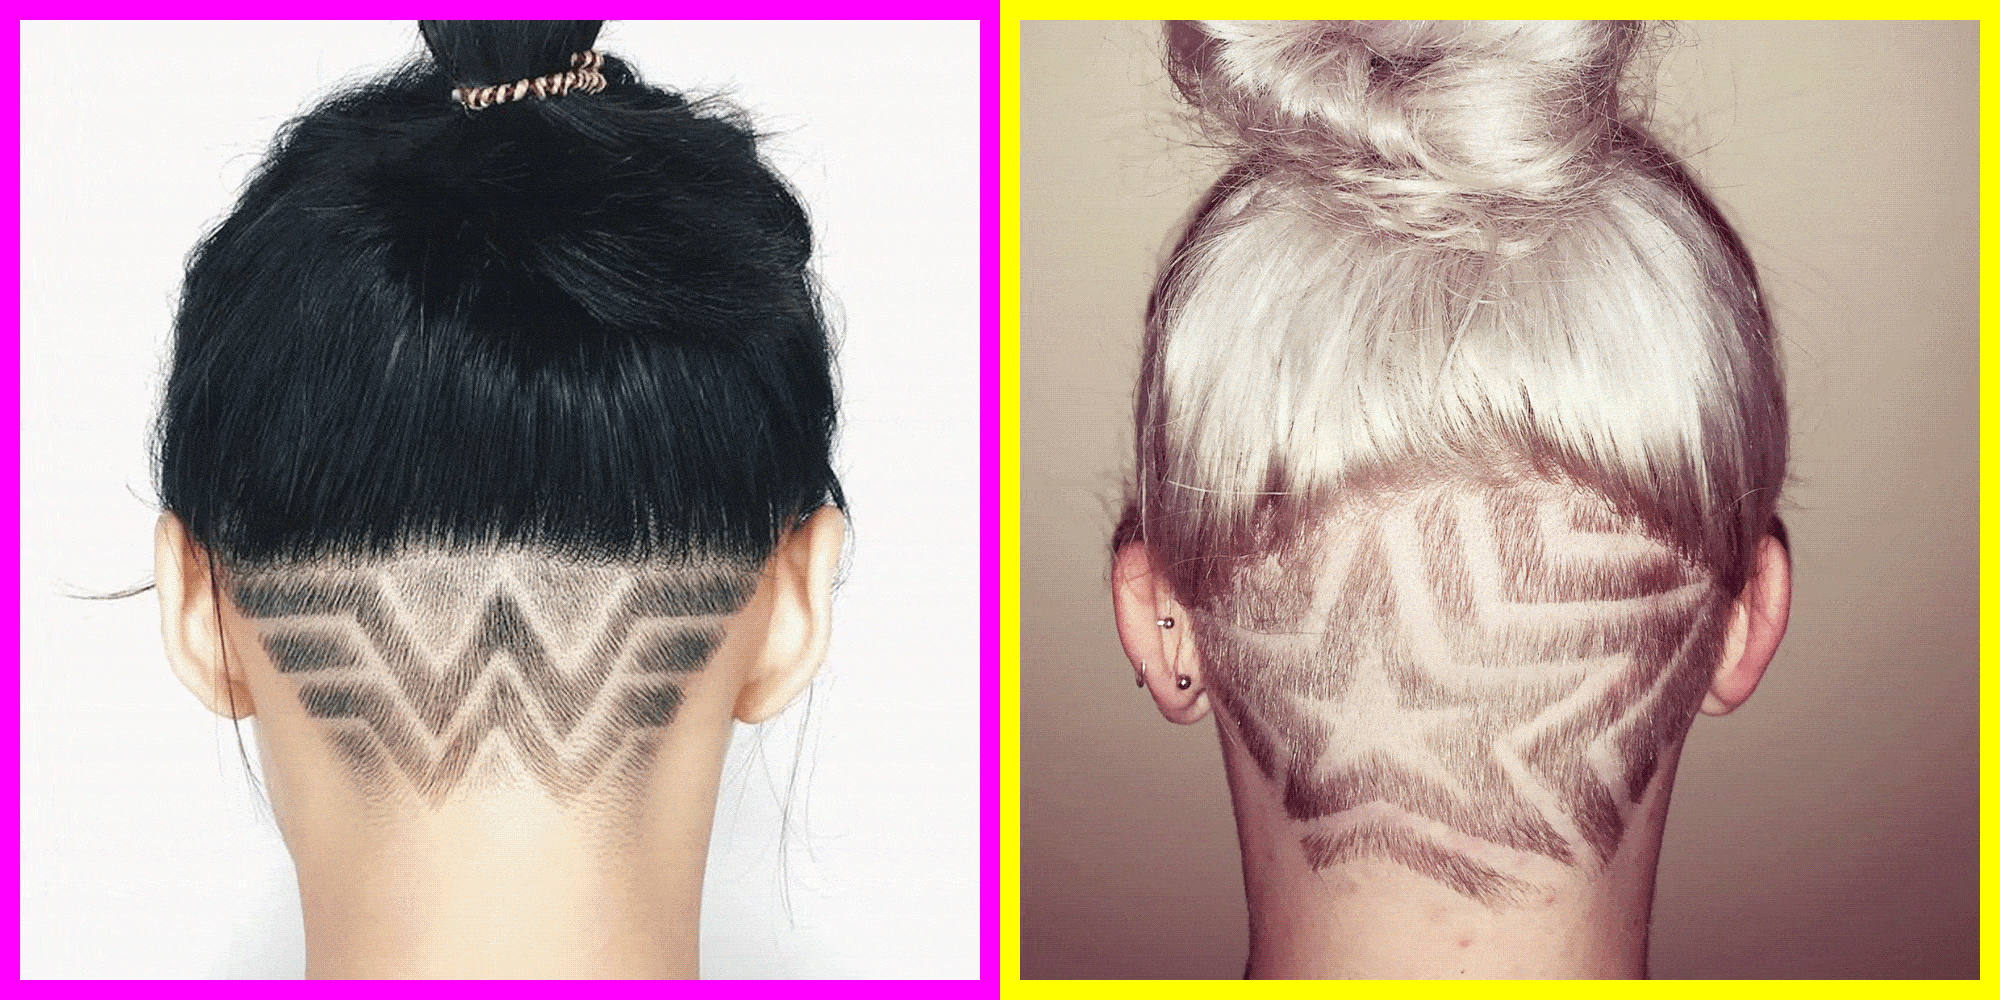 26 Undercut Hairstyles for Women That Are a Party in the Back   theFashionSpot